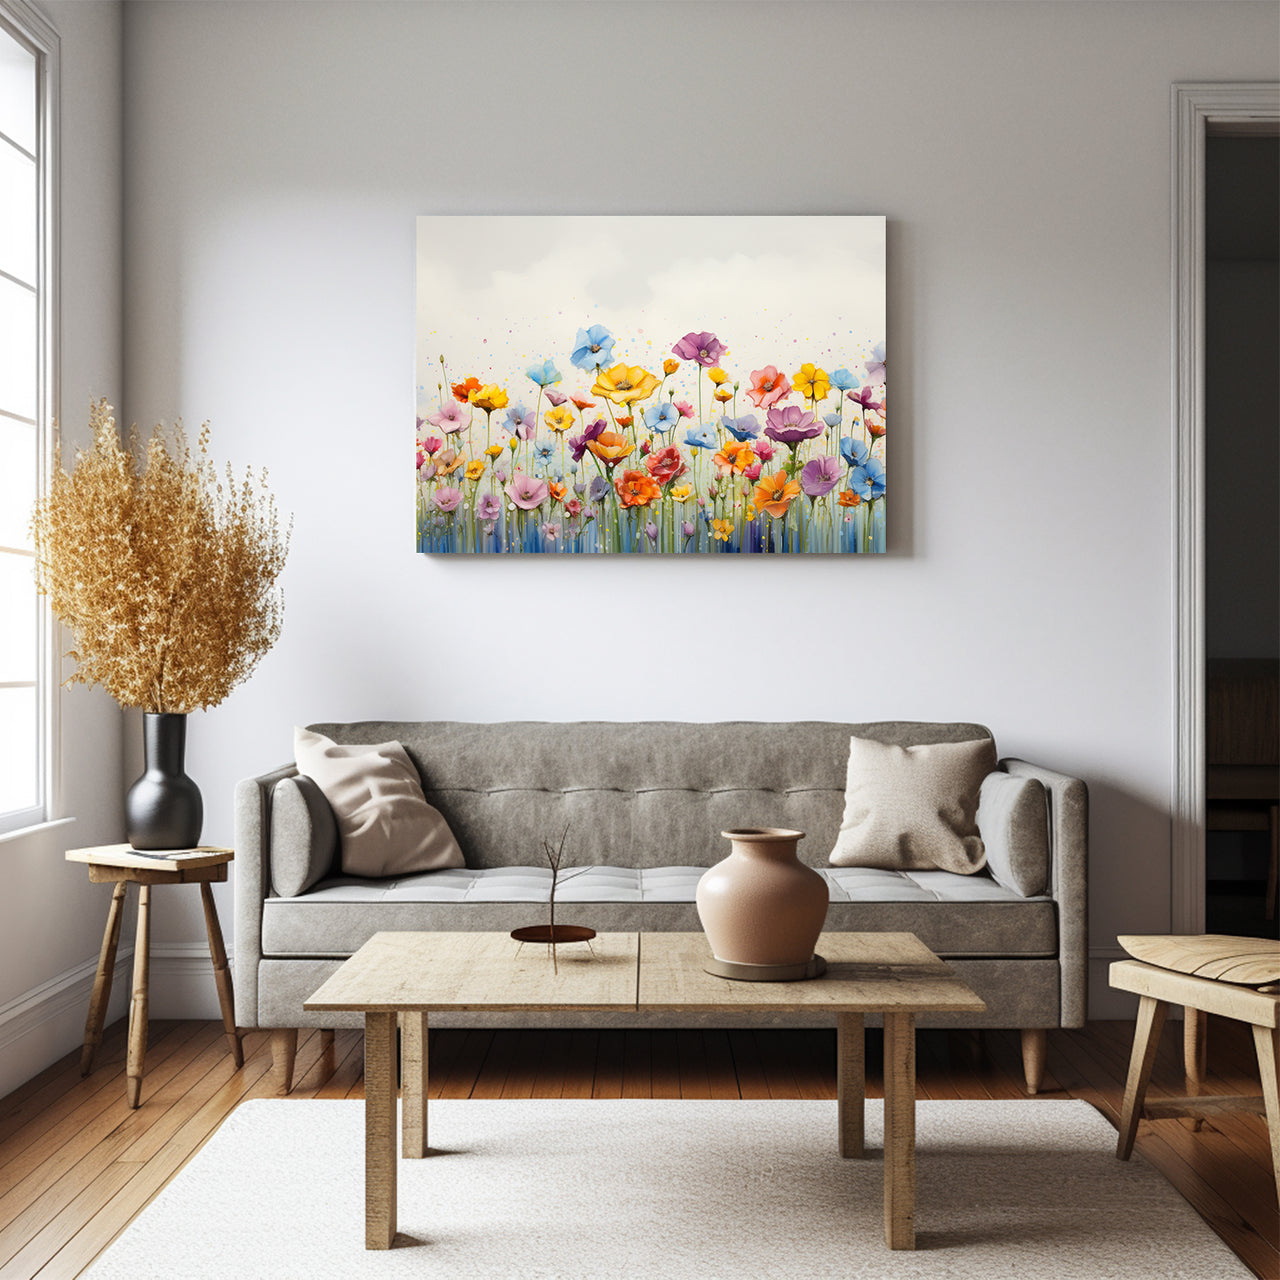 Wildflowers on Canvas, Flowers in Rain 05, Minimalist Flower Wall Art, Abstract Wall Art, Watercolor flowers, Floral Print, Classic, Rustic Farmhouse, Wildflower Home Decor, Flower Painting Canvas, Floral Wall Art